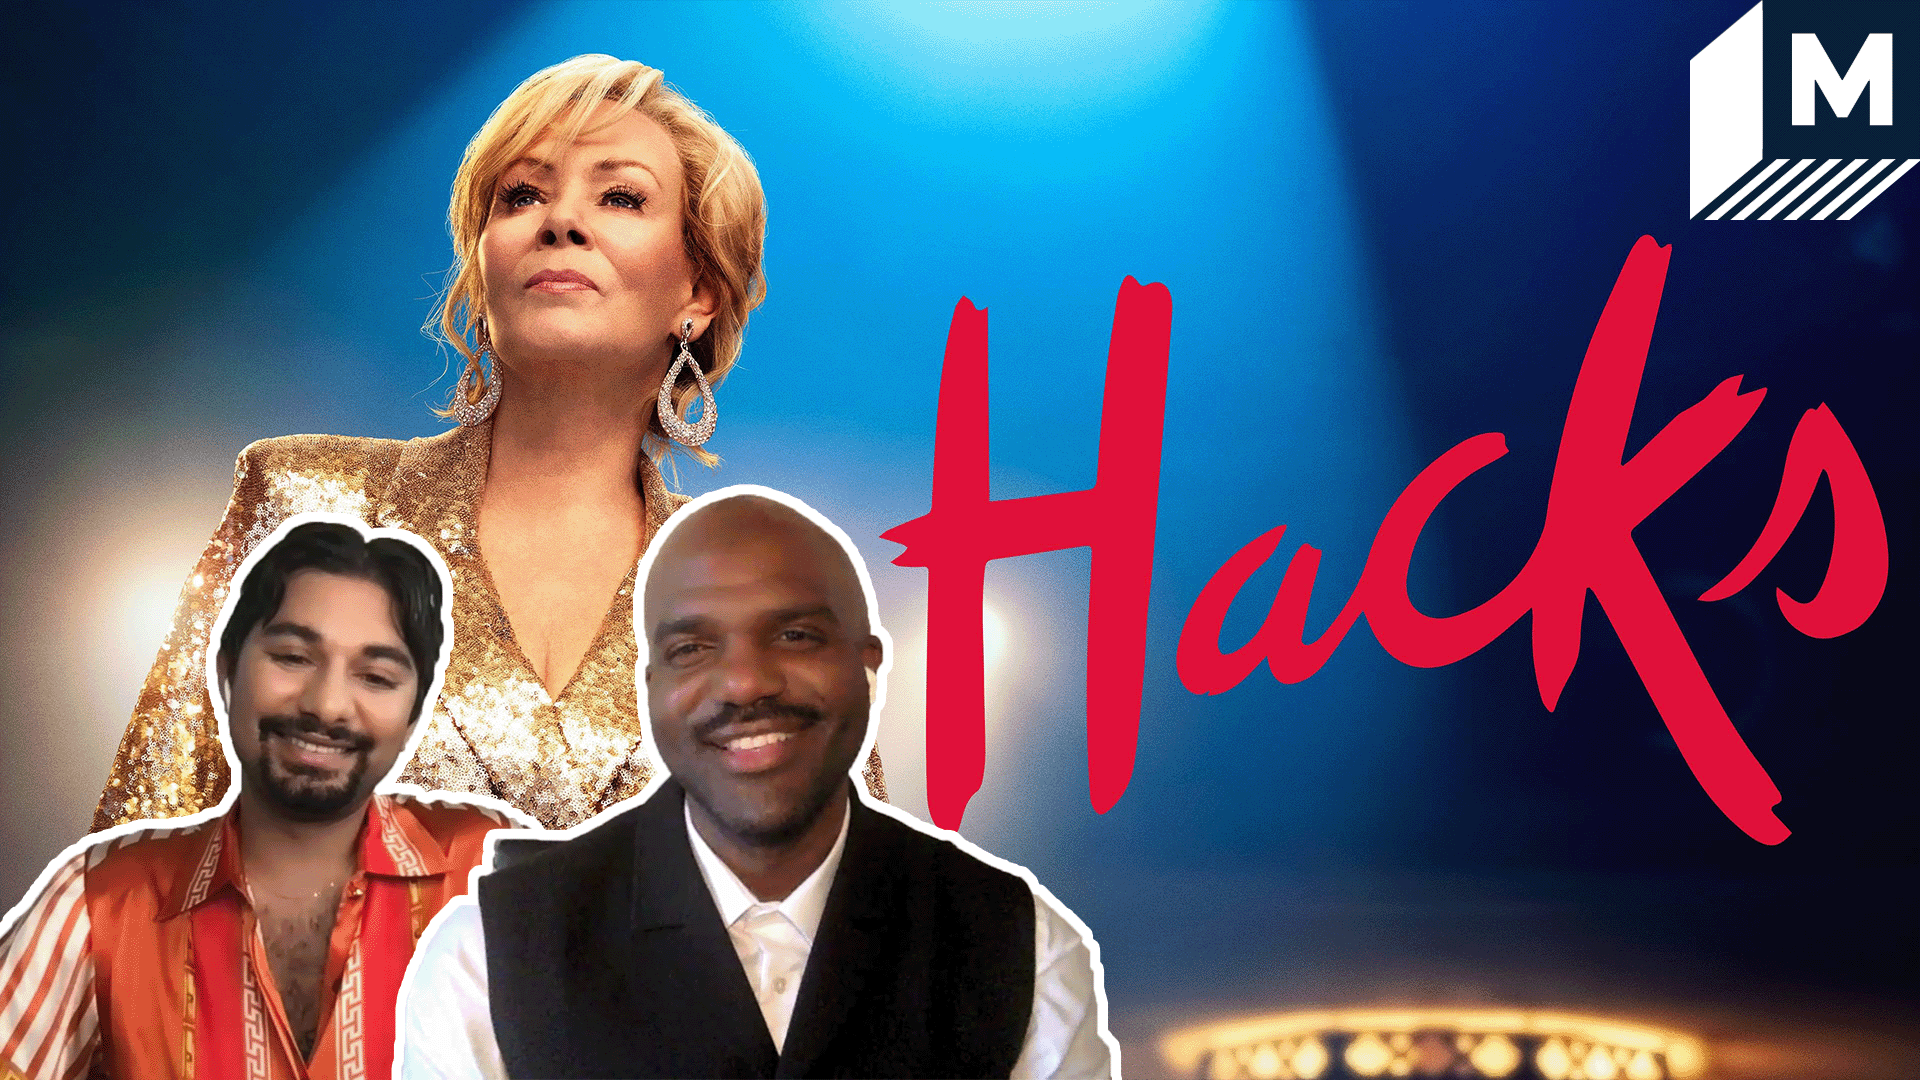 Carl Clemons-Hopkins and Mark Indelicato smiling in front of the Hacks Season 2 poster with Jean Smart